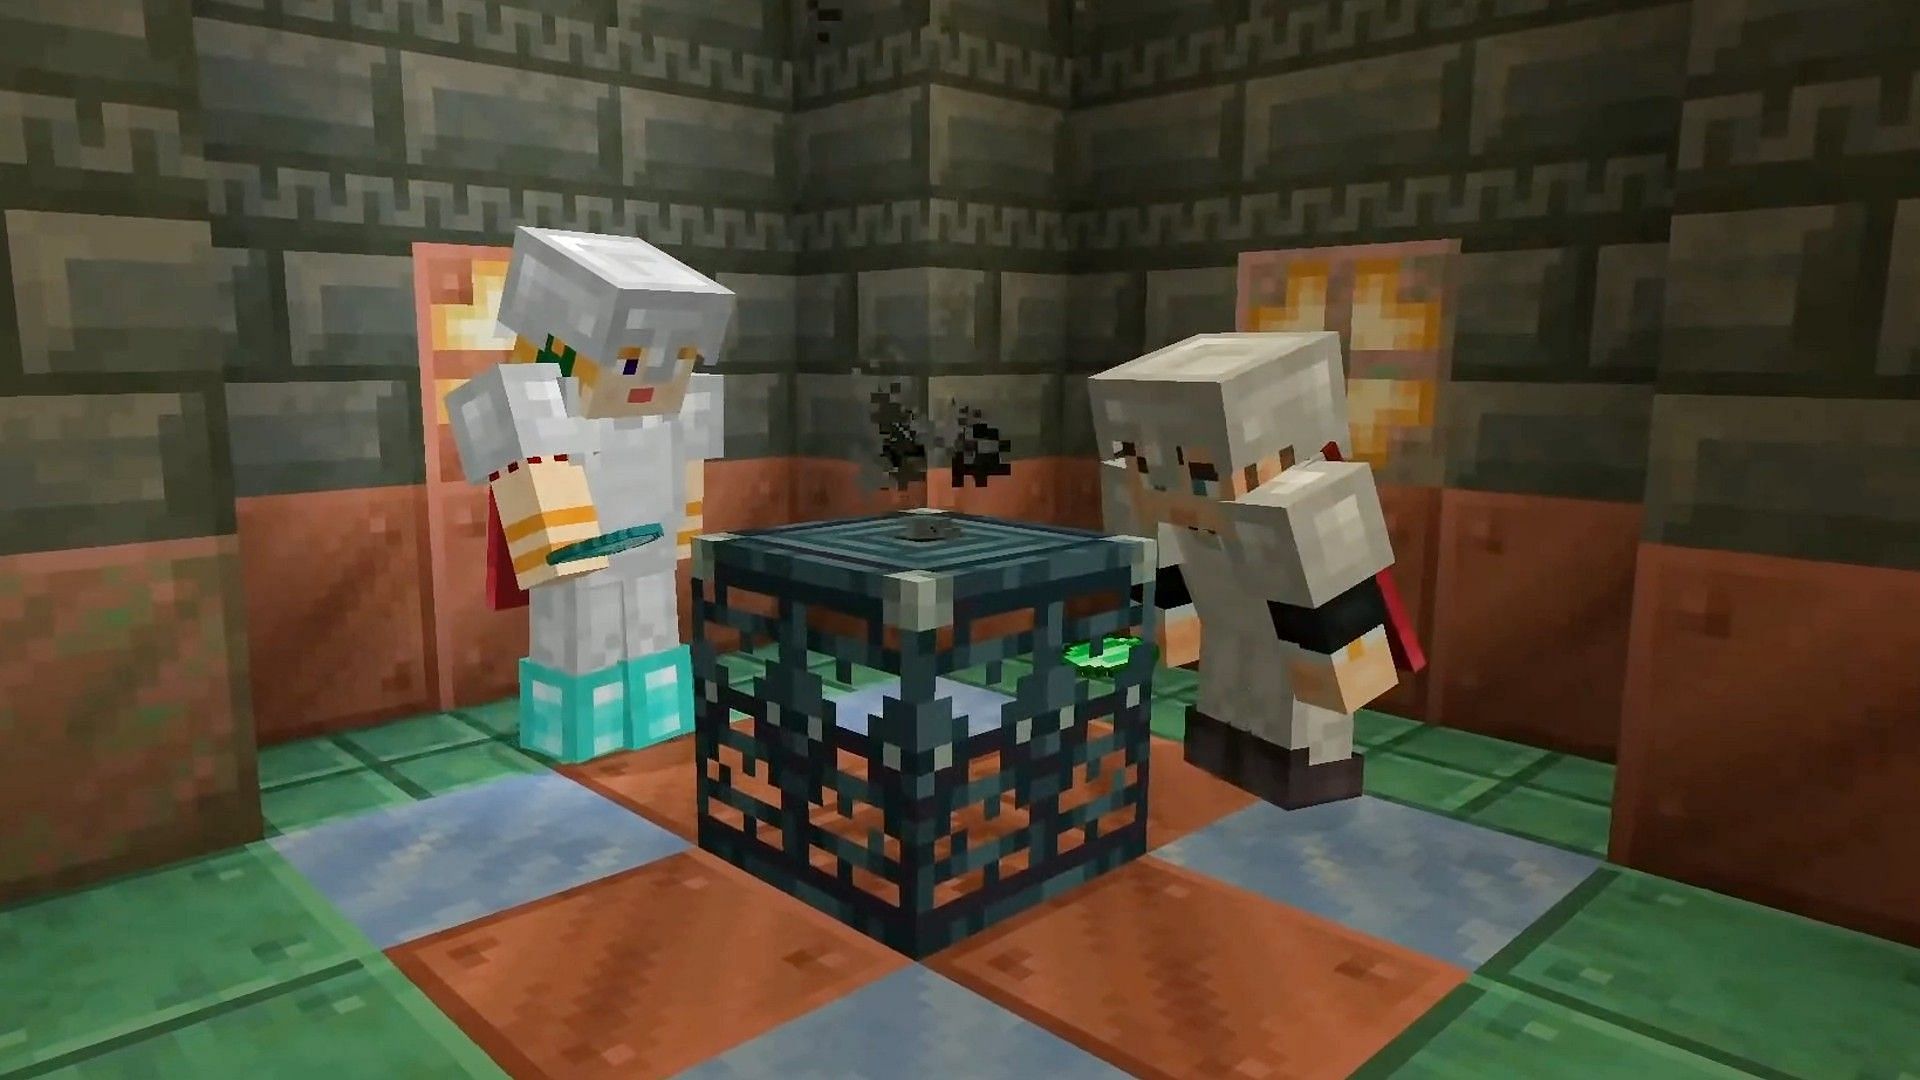 Minecraft hits 300 million sales, update 1.21 announced with trial chambers